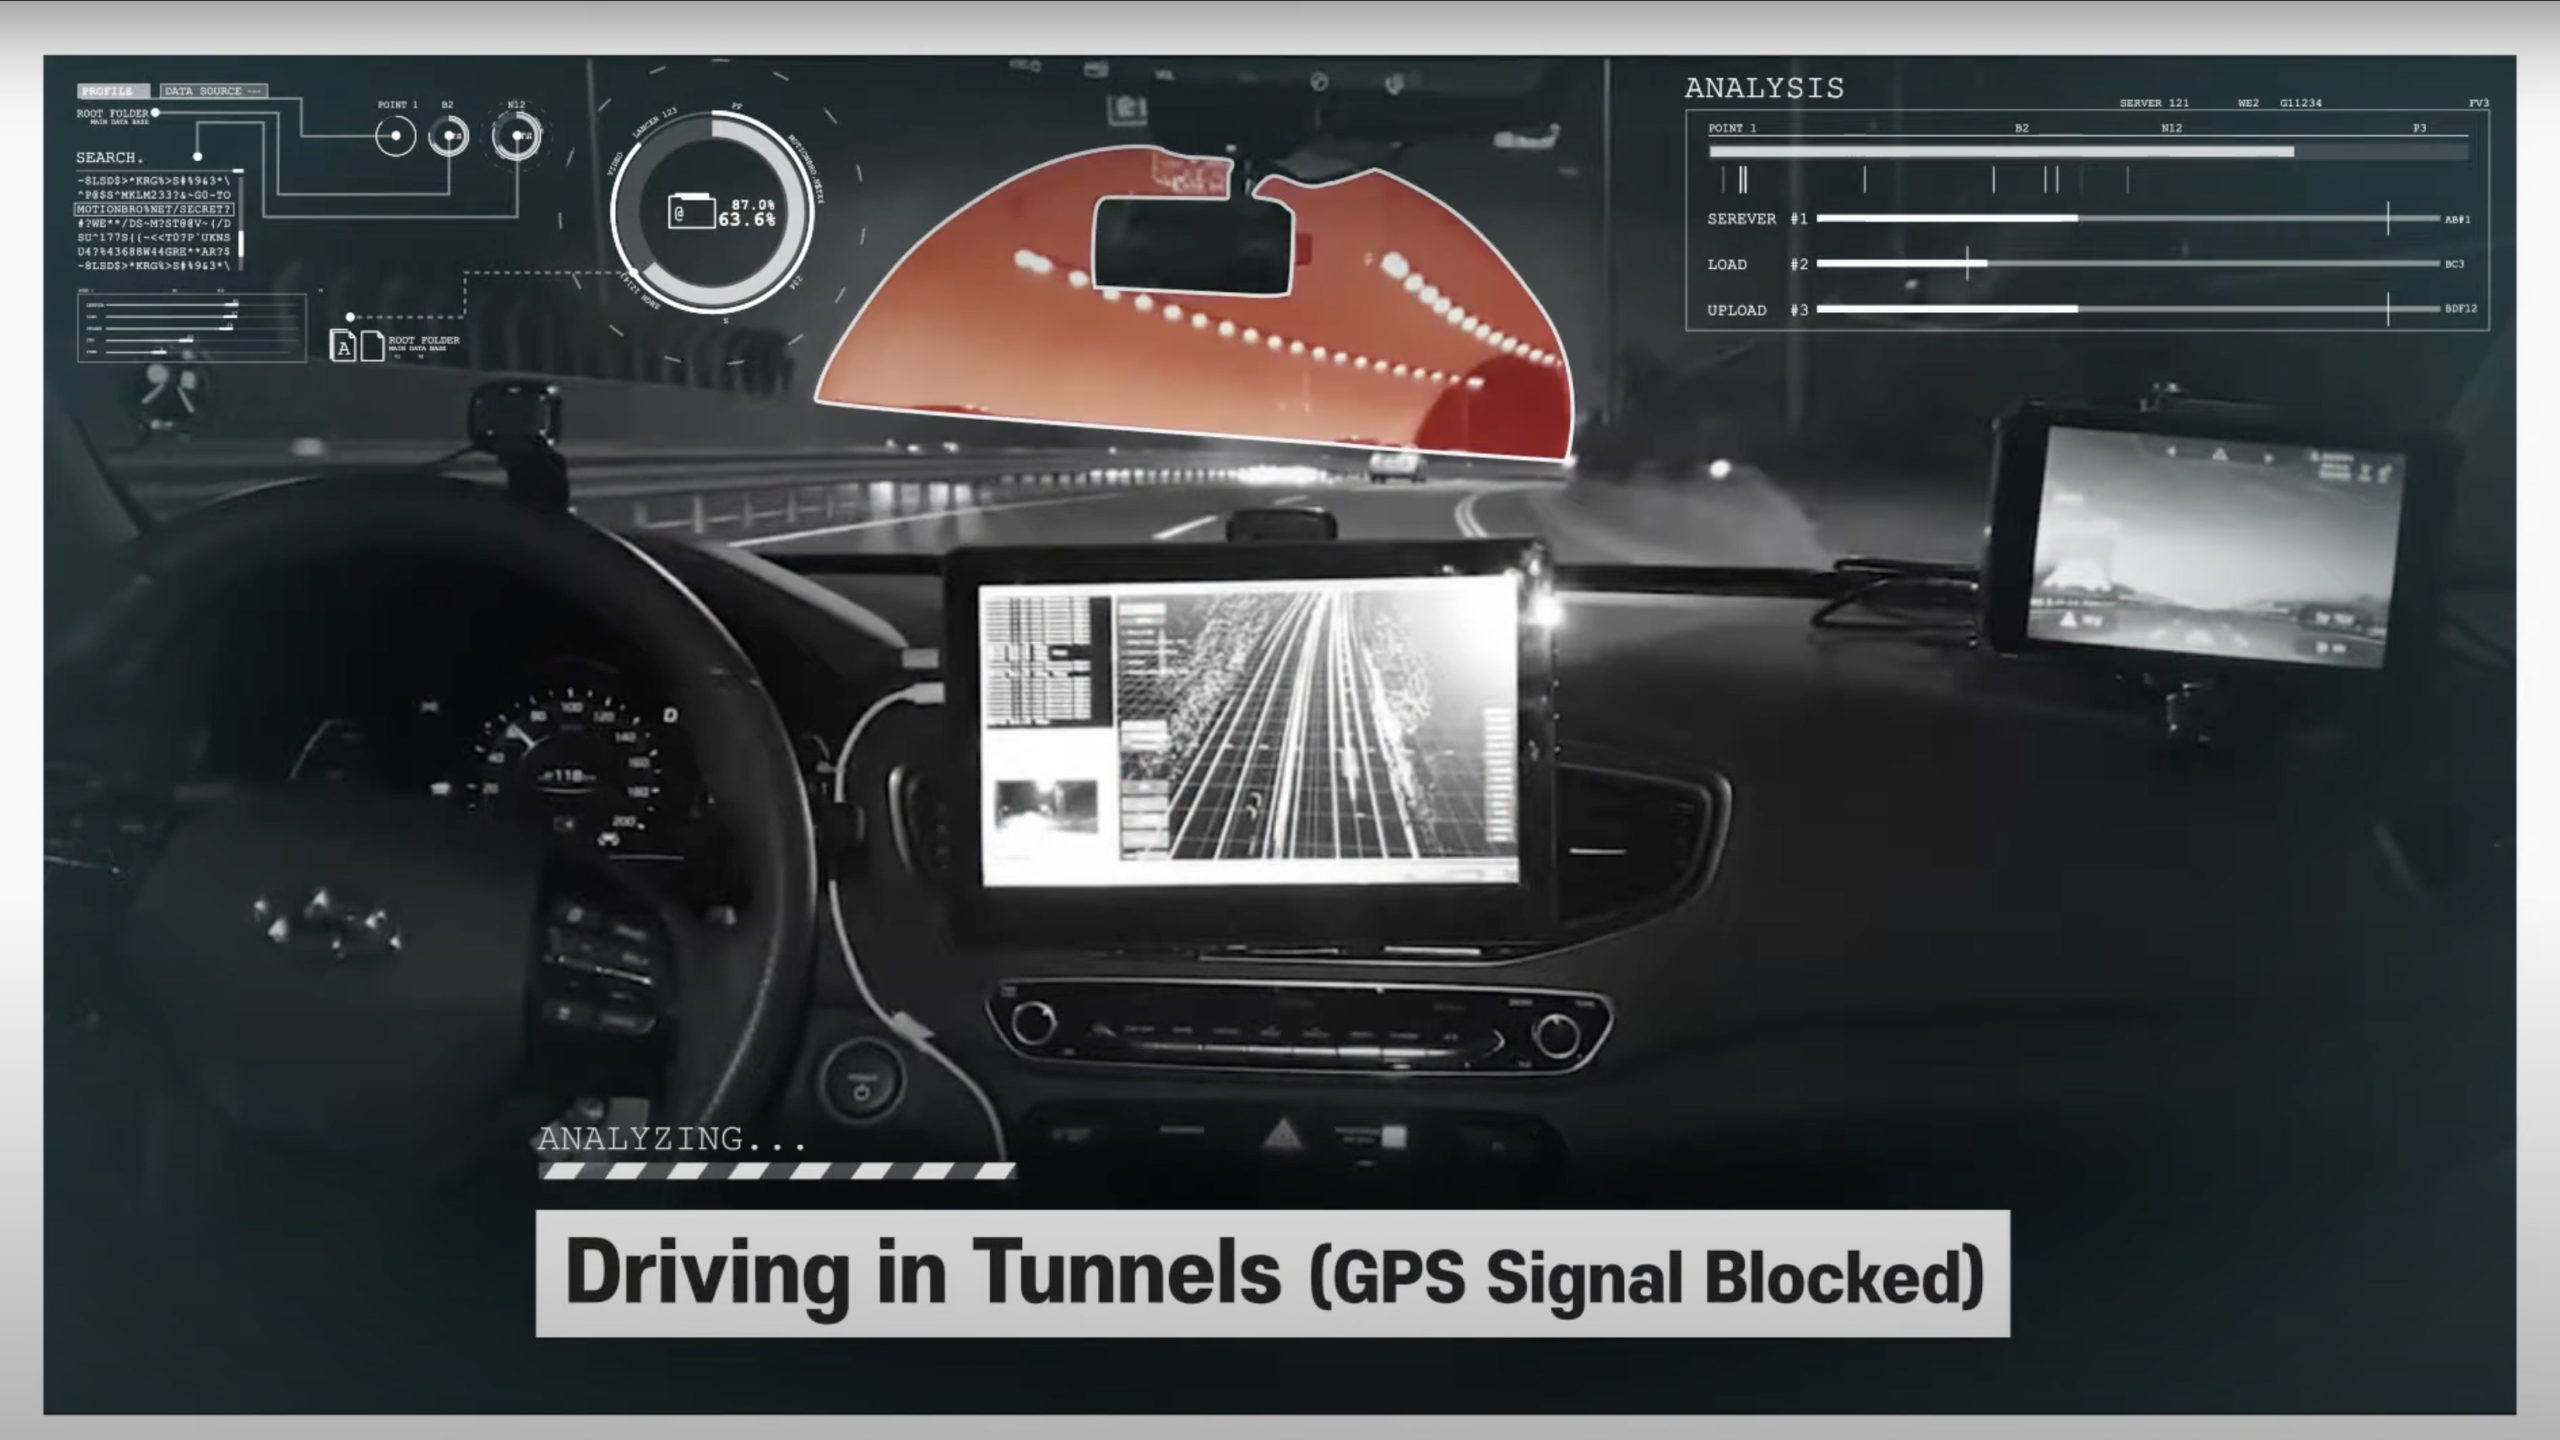 Autonomously Driving Through Tunnels, Even with Blocked GPS